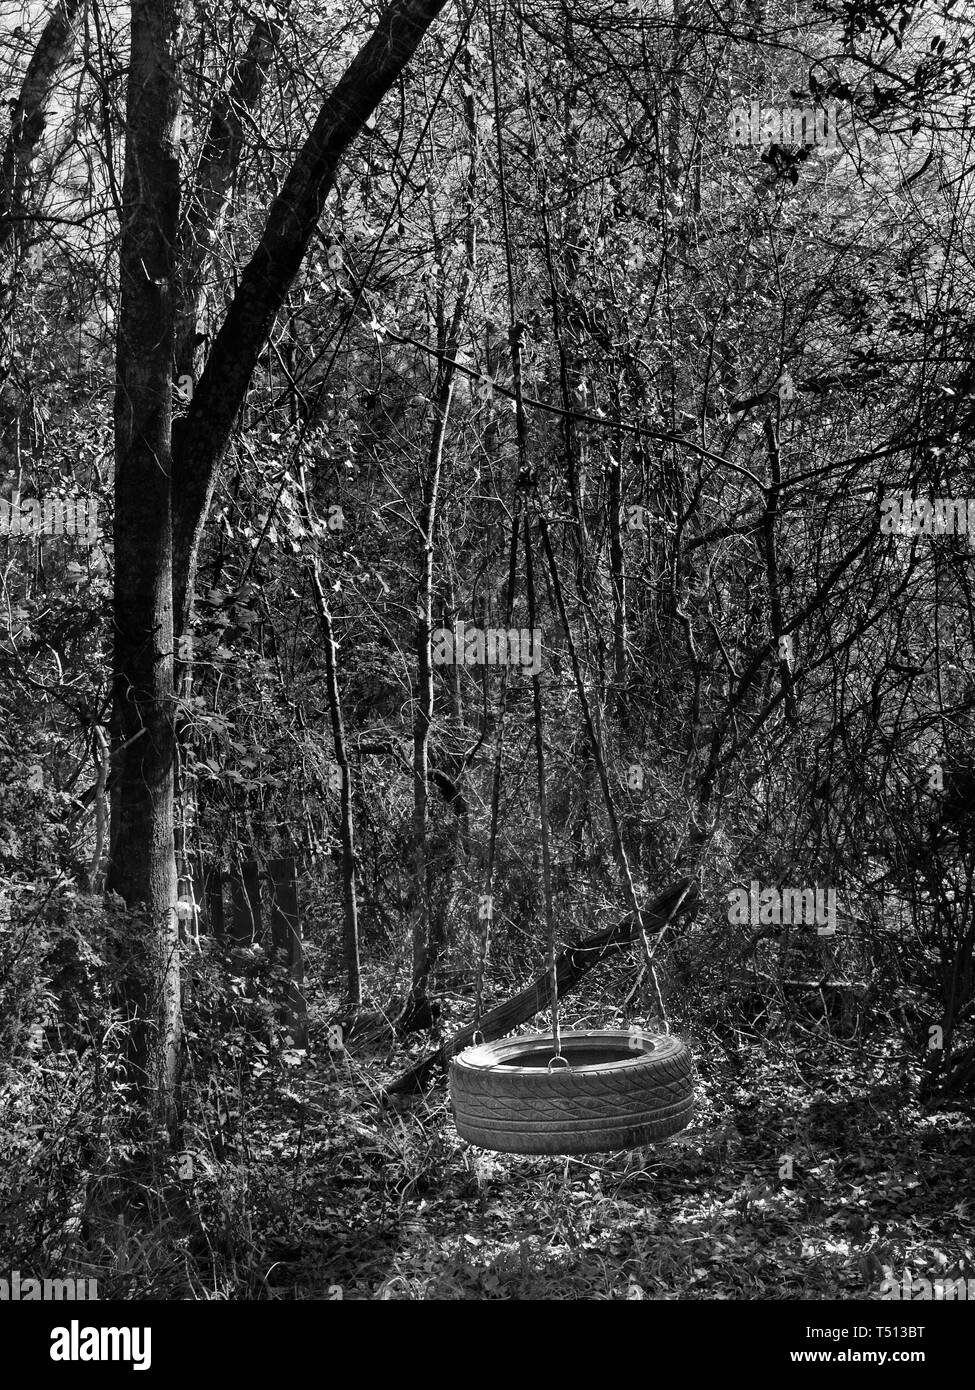 The Woodlands TX USA - 01/09/2019  -  Tire Swing in the Woods in B&W Stock Photo